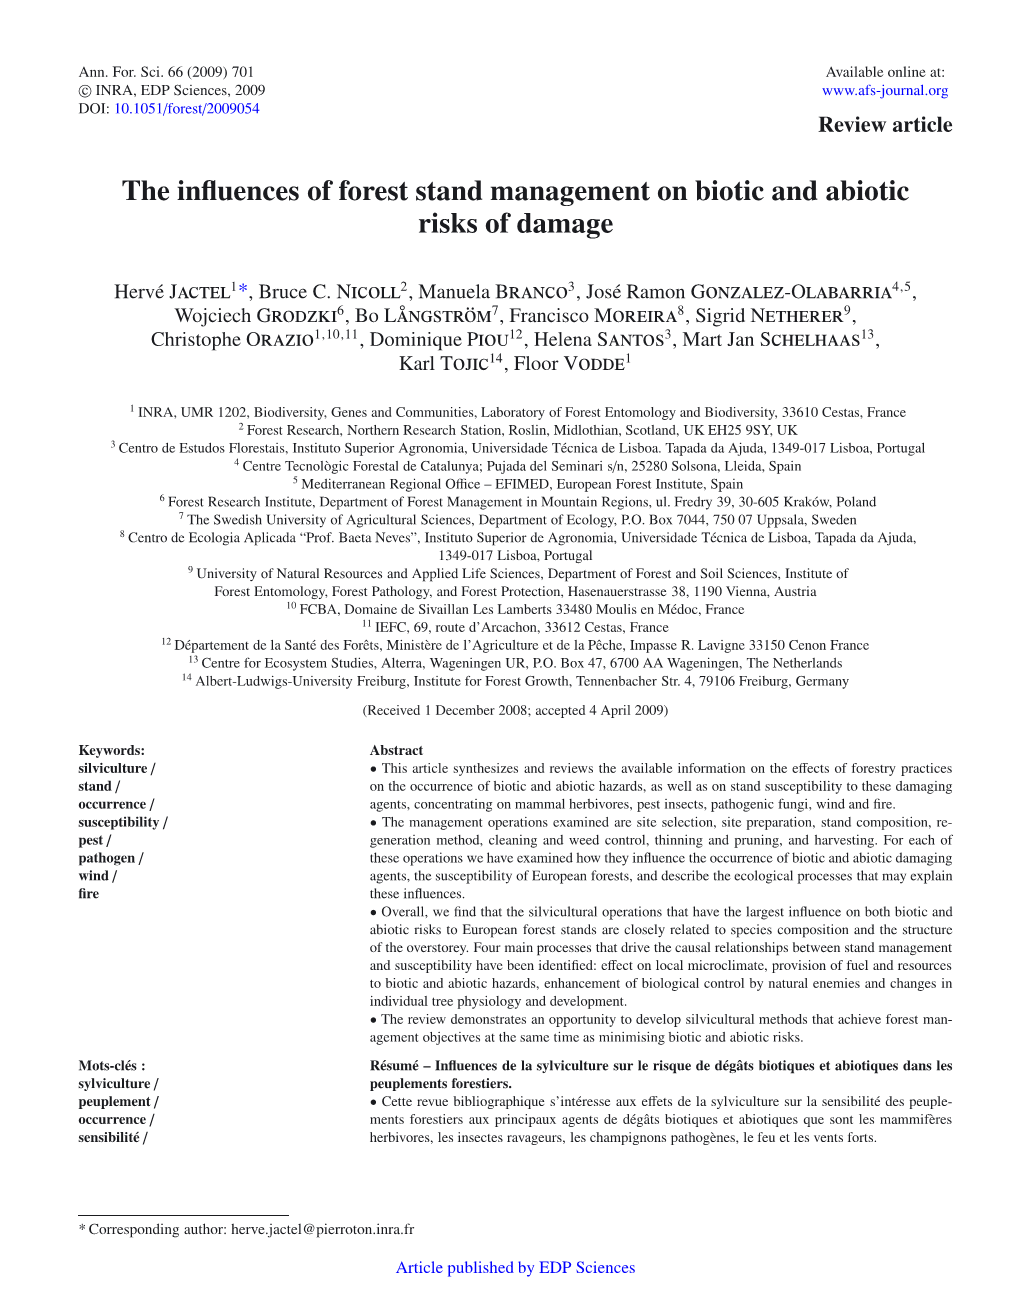 The Influences of Forest Stand Management on Biotic and Abiotic